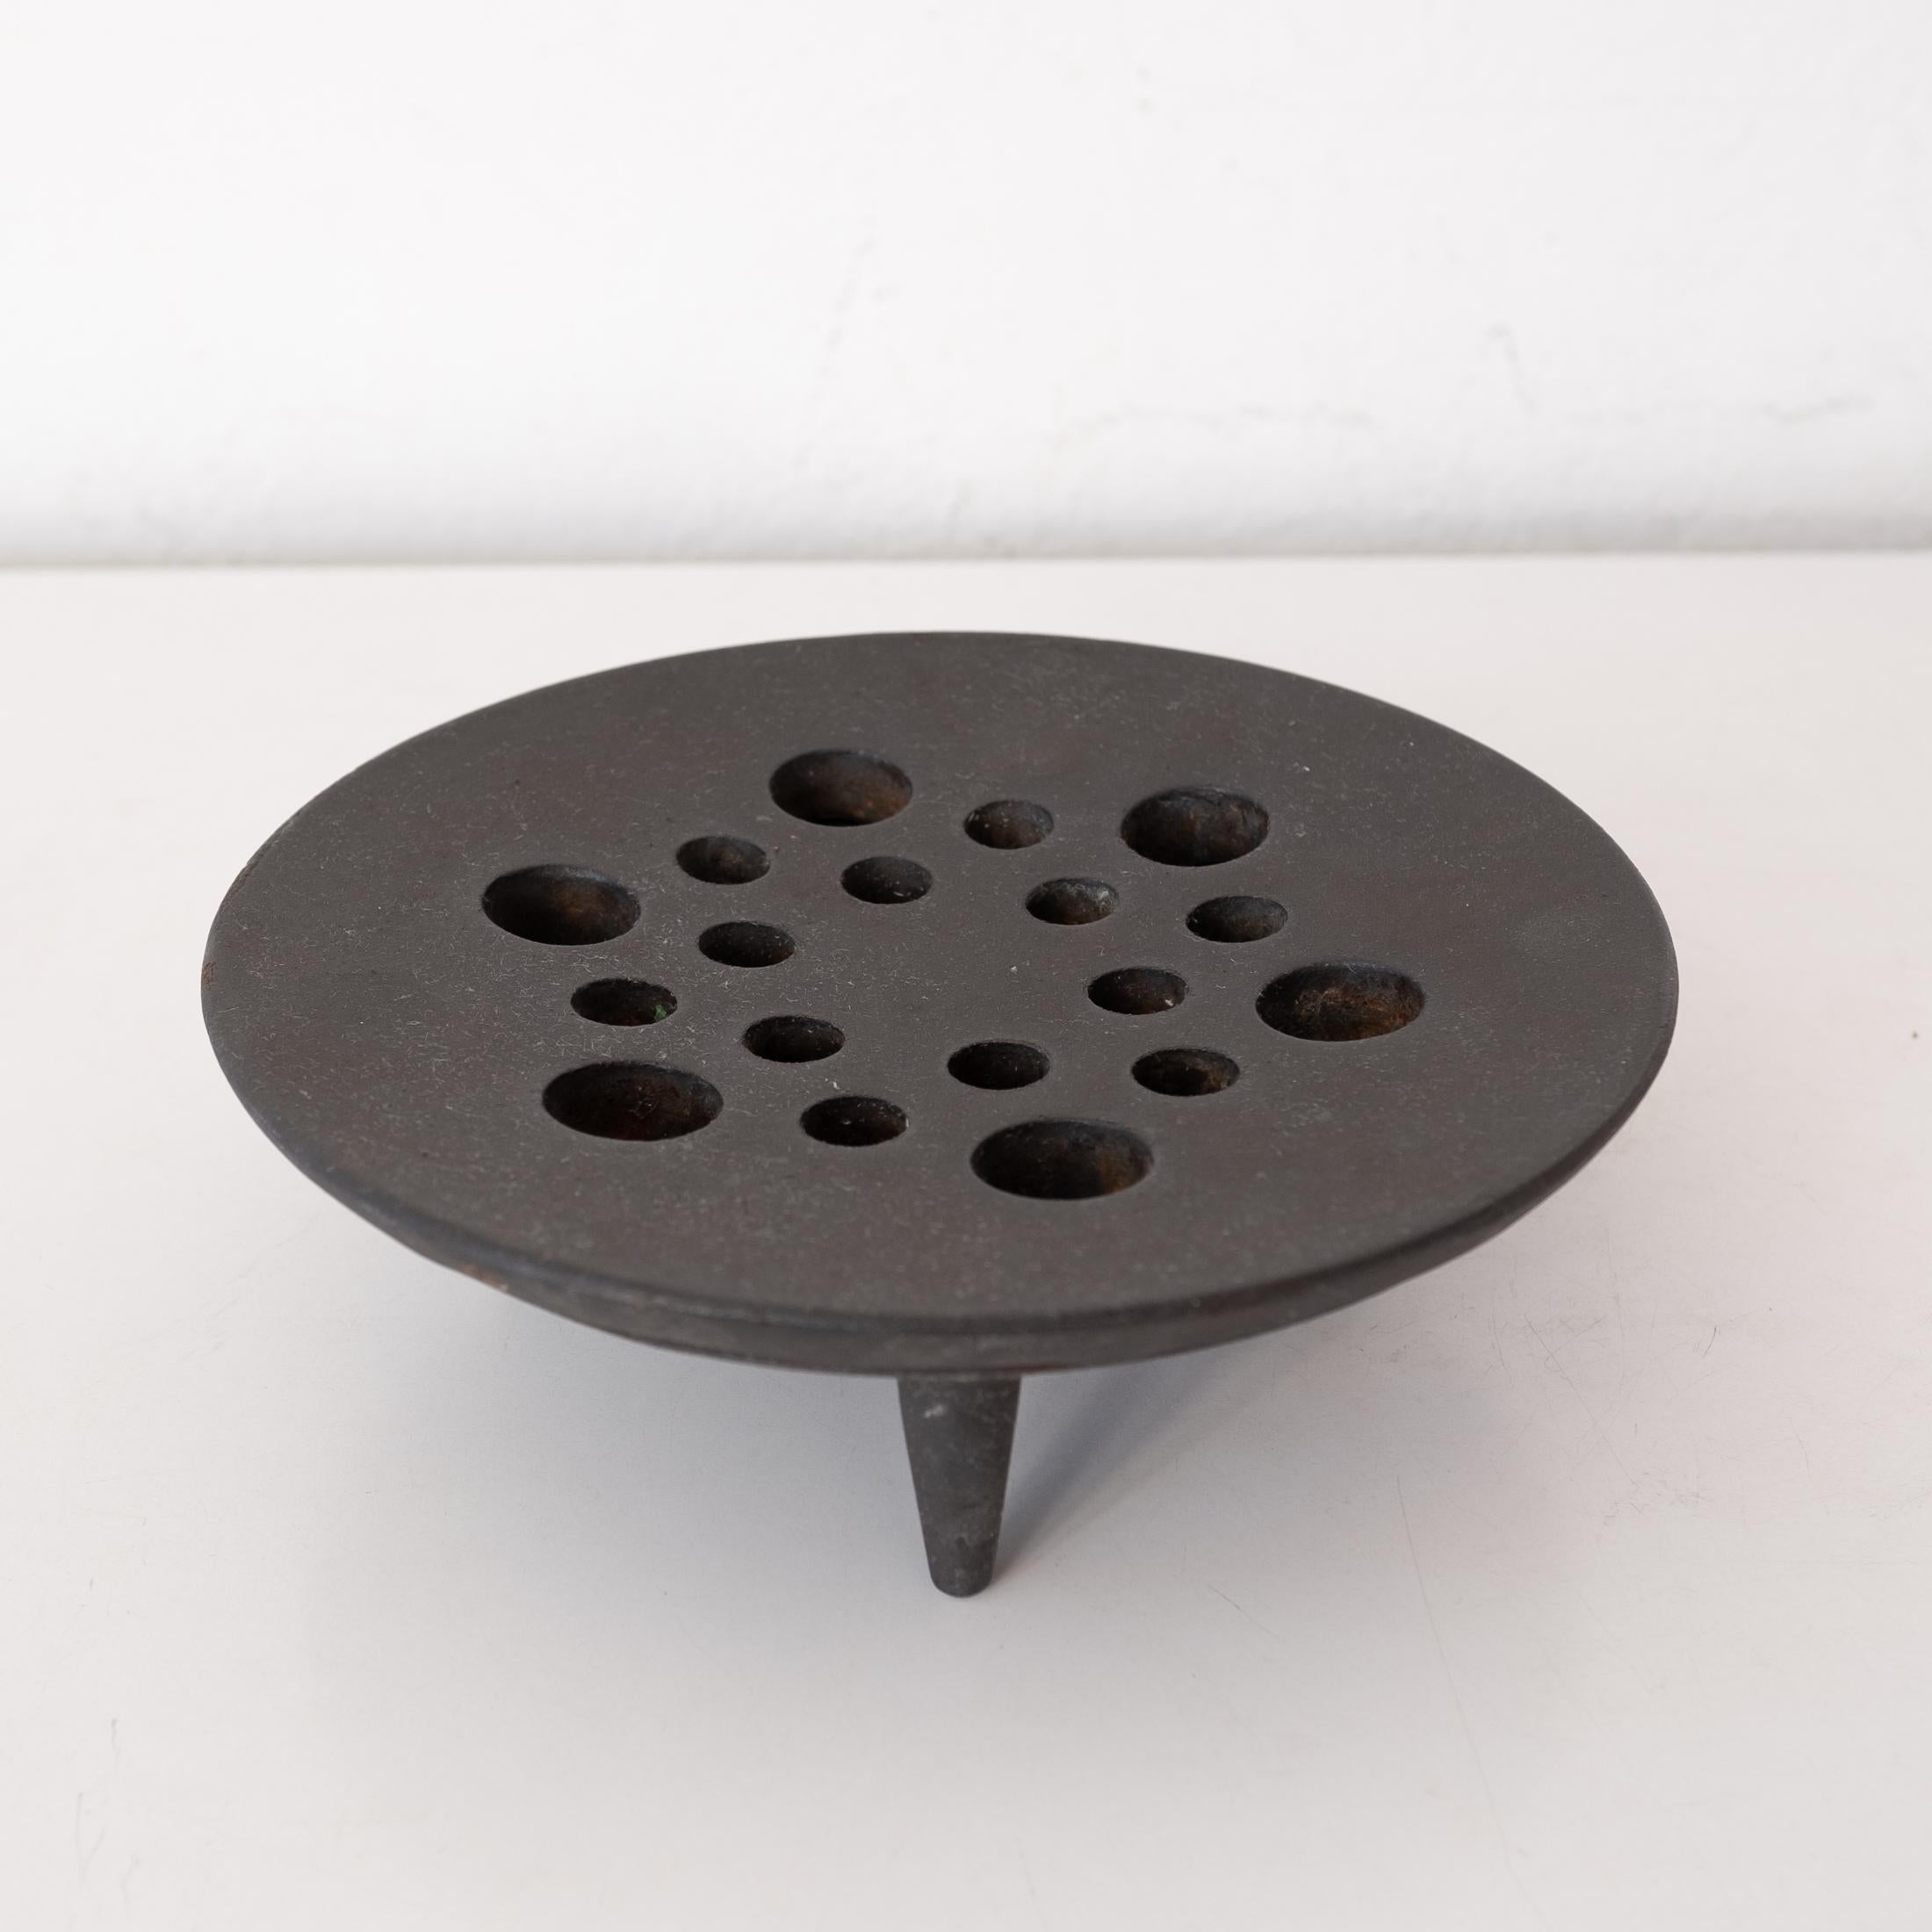 Jens Quistgaard tripod cast iron candle or incense holder by Dansk. The modernist design looks great as just an object. 1950s. Made in Denmark.